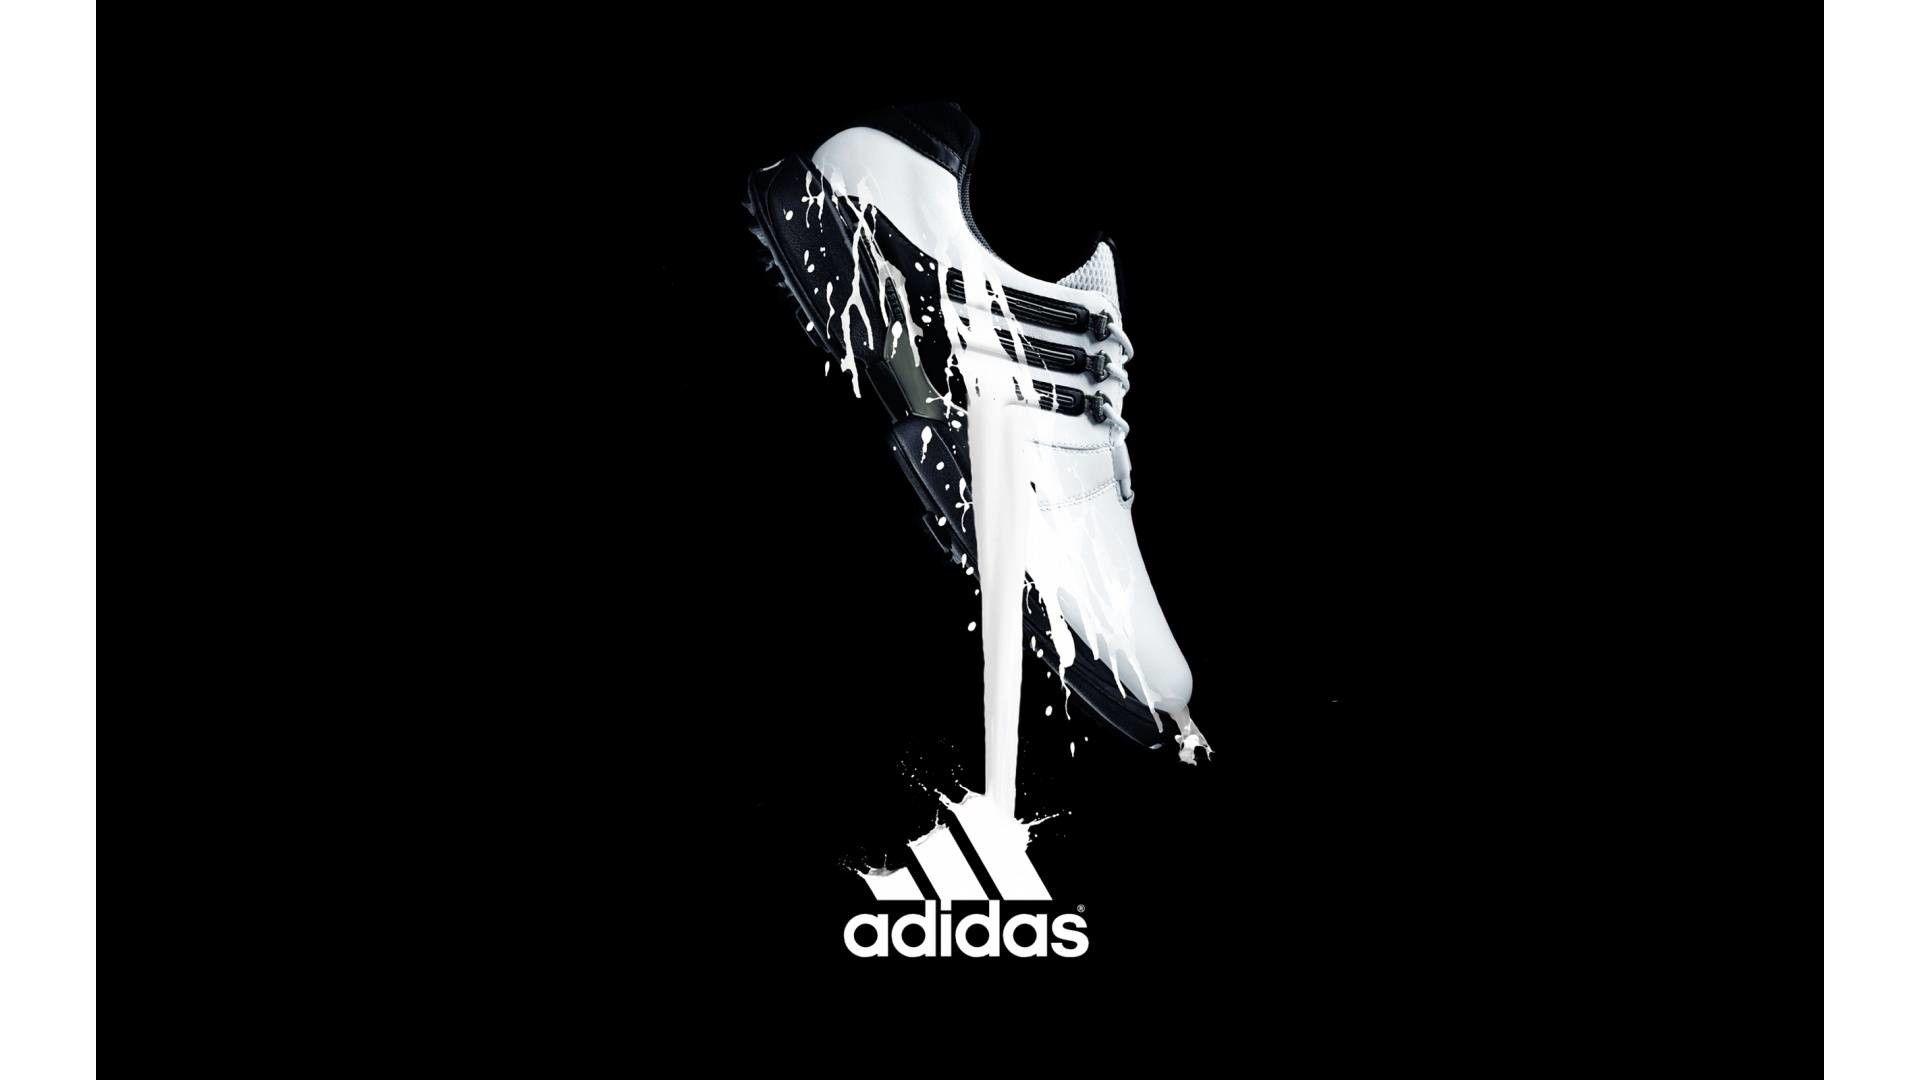 Adidas Soccer Wallpapers - Top Free 